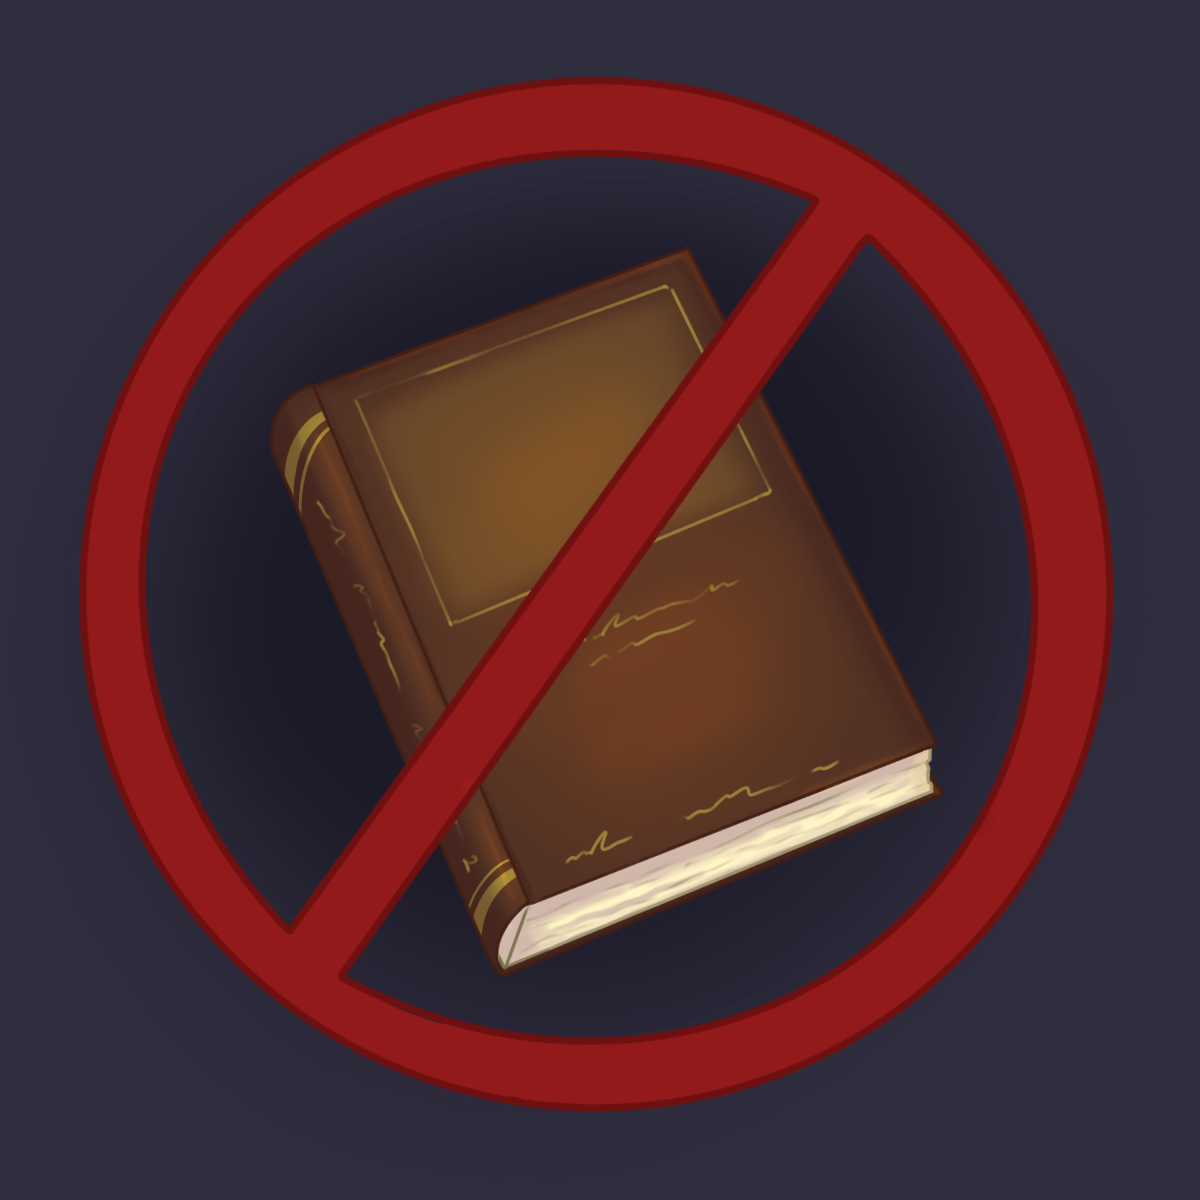 Book banning, in my opinion, will almost never be helpful.